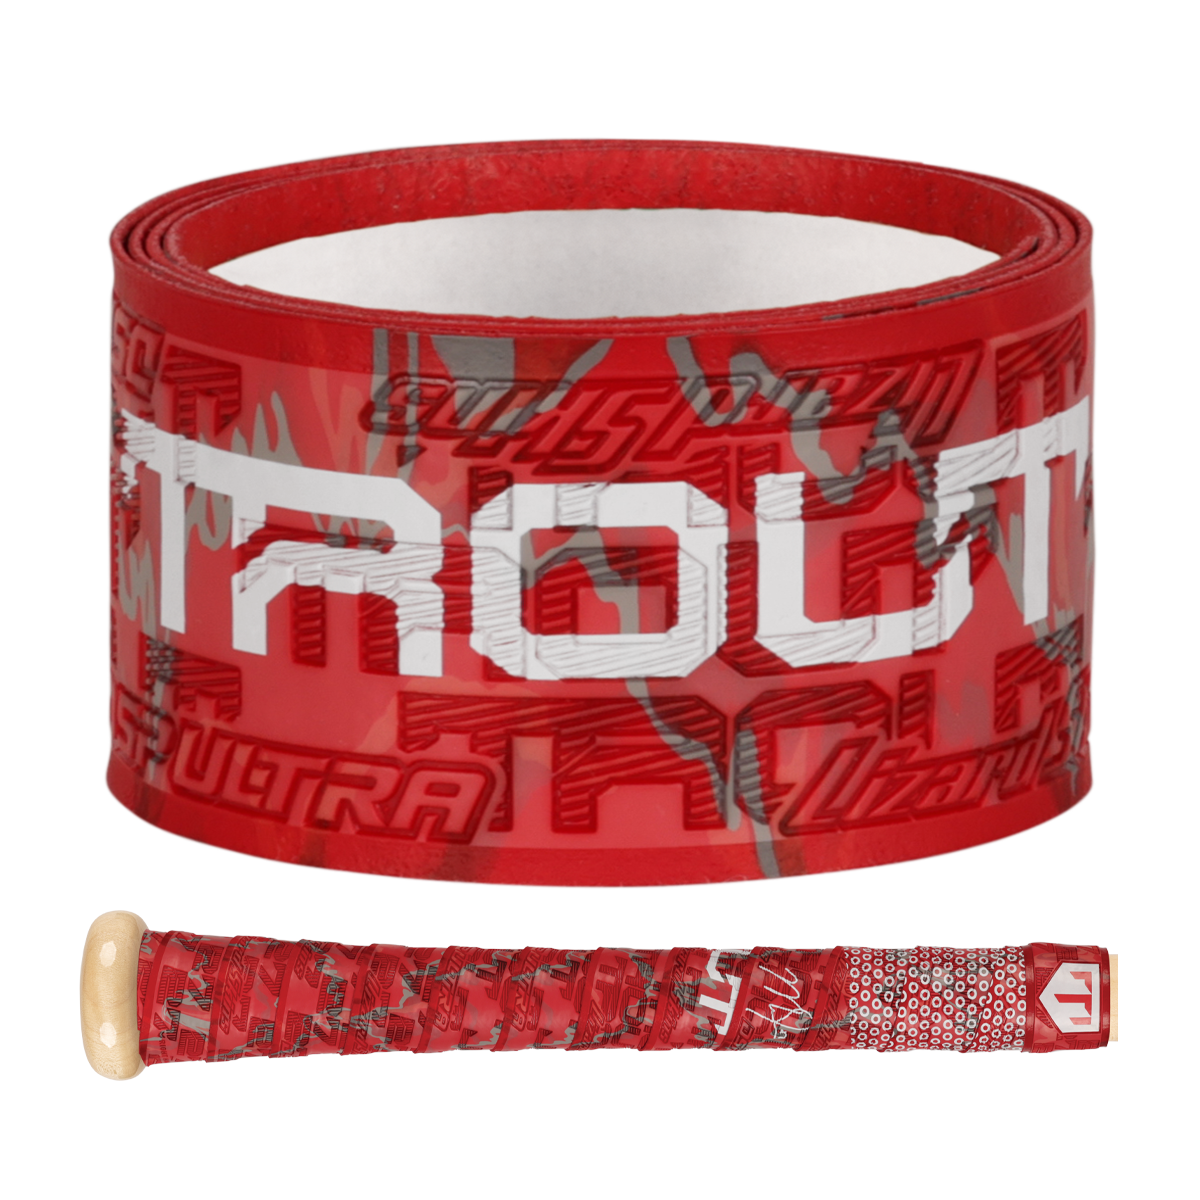 DSP Ultra Bat Grip - Mike Trout - Ruby 1 .1 Mm